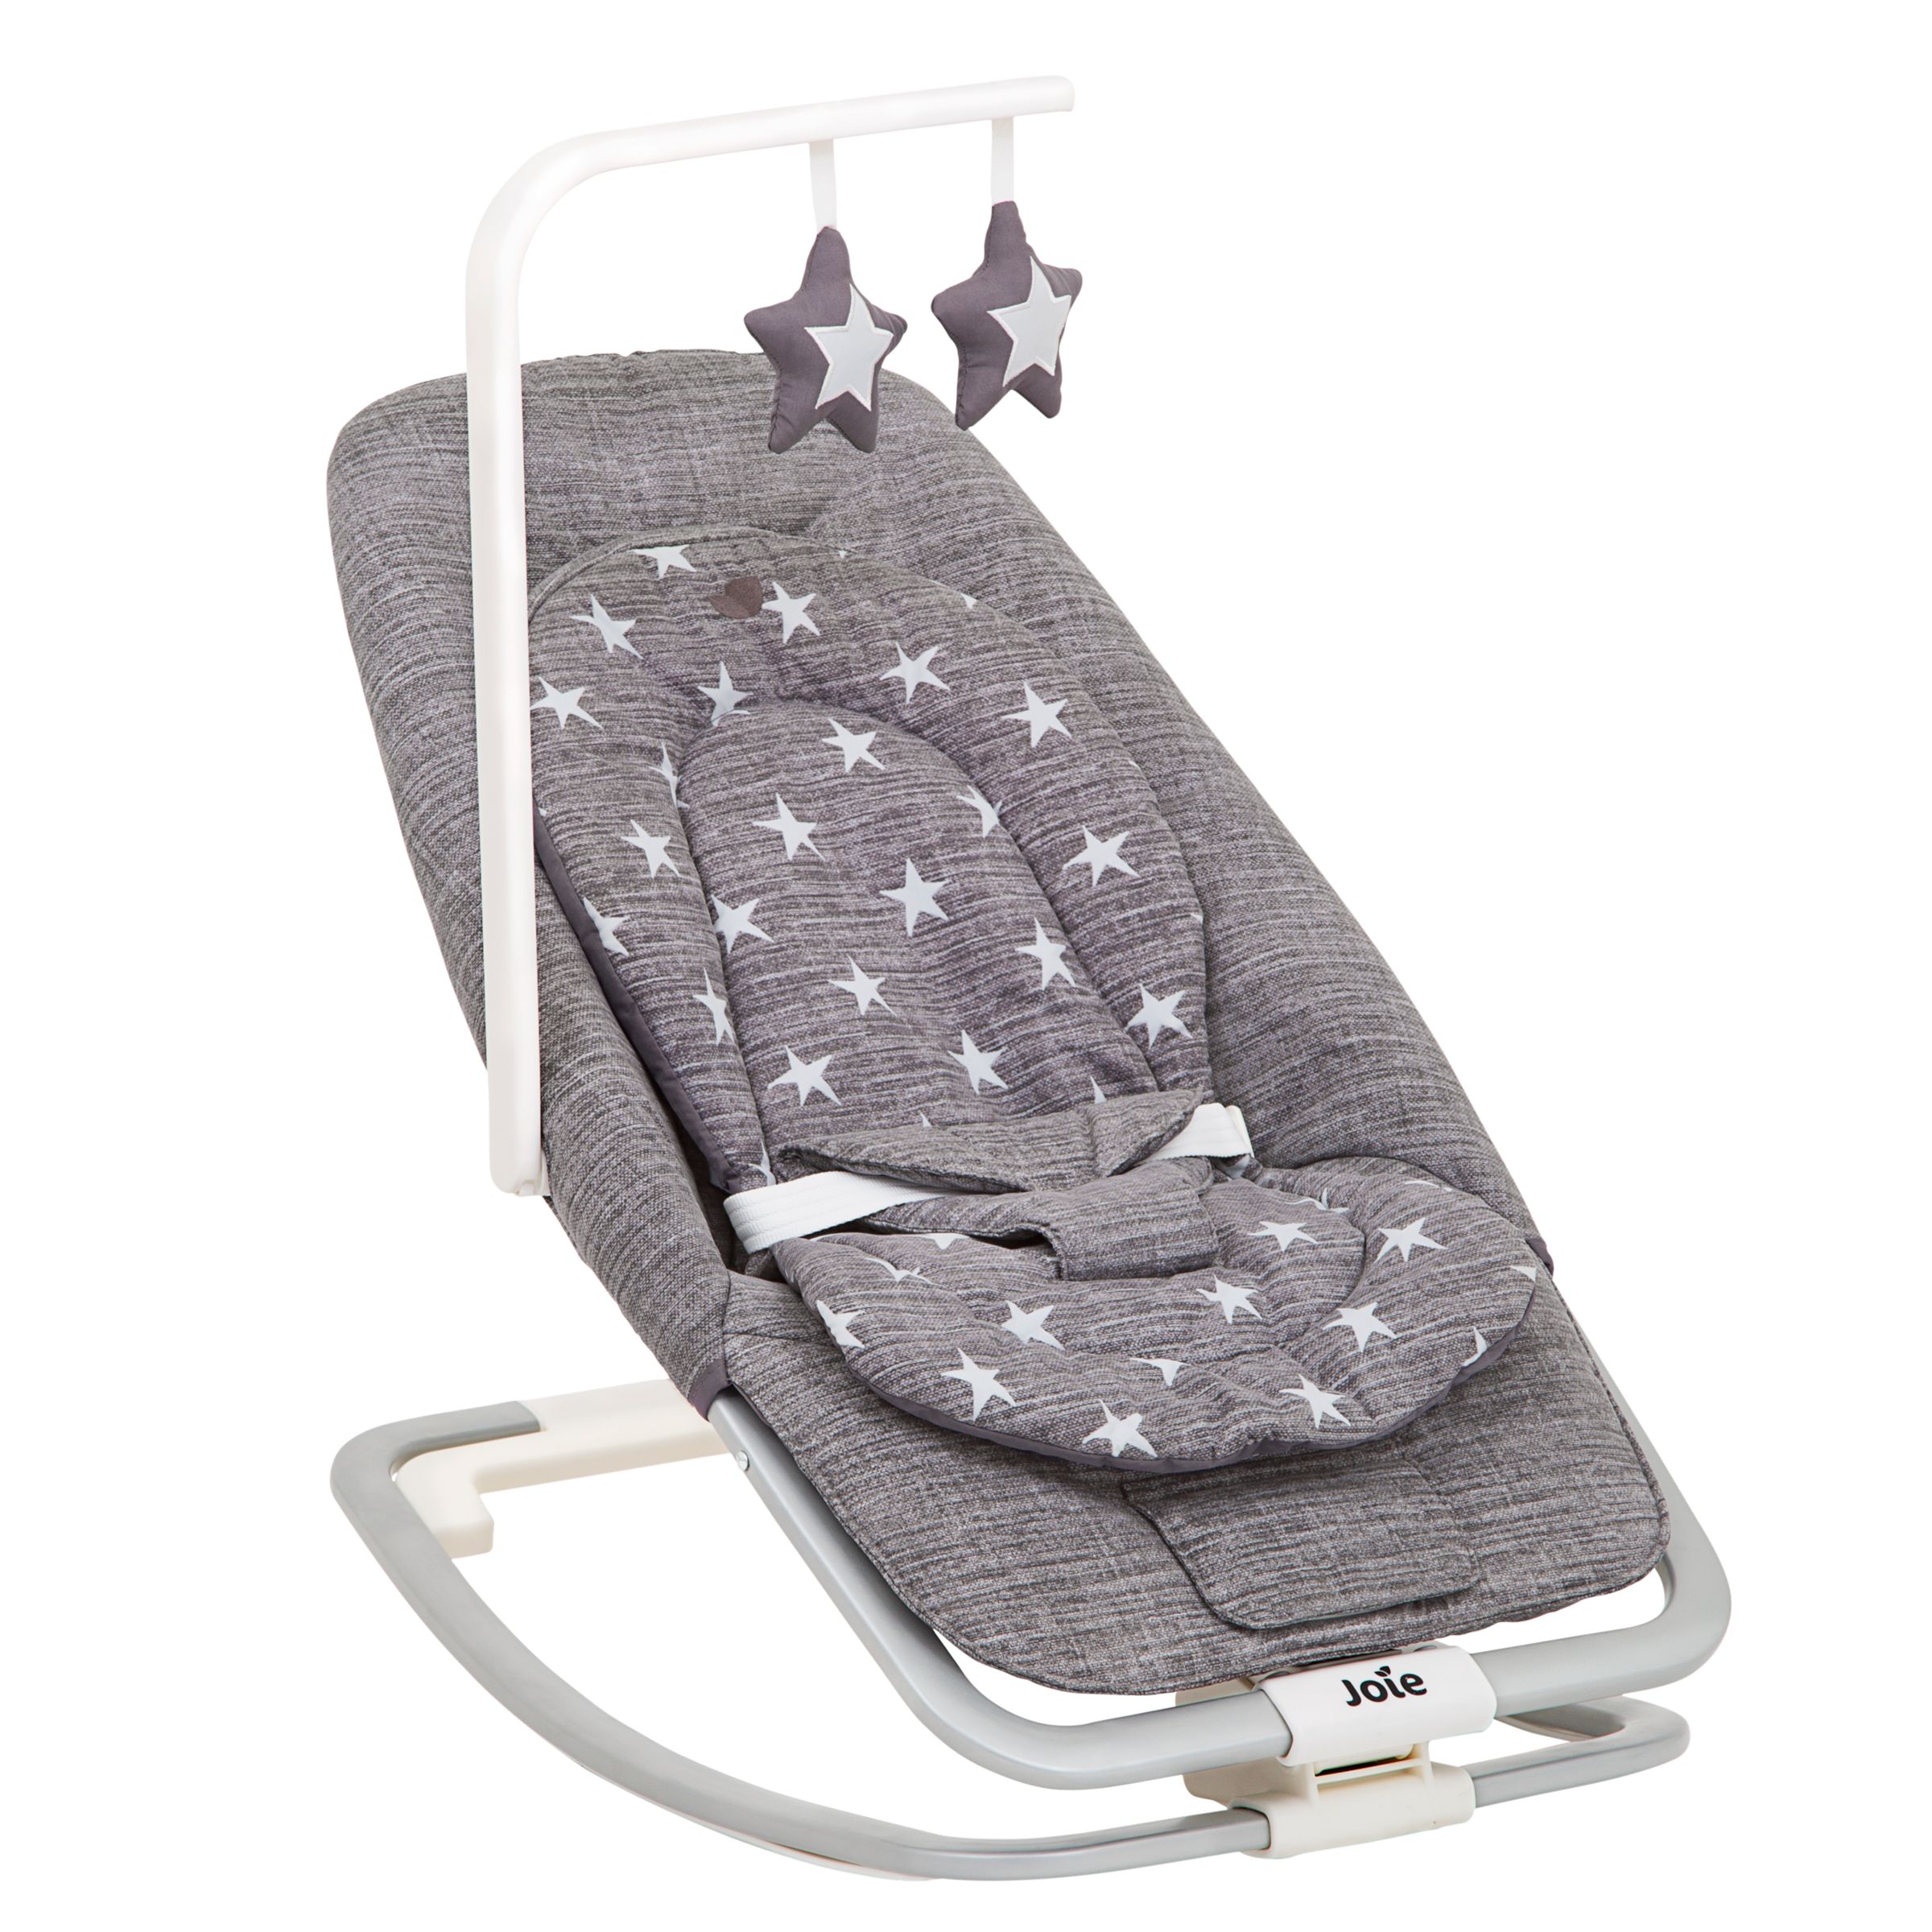 joie bouncy chair